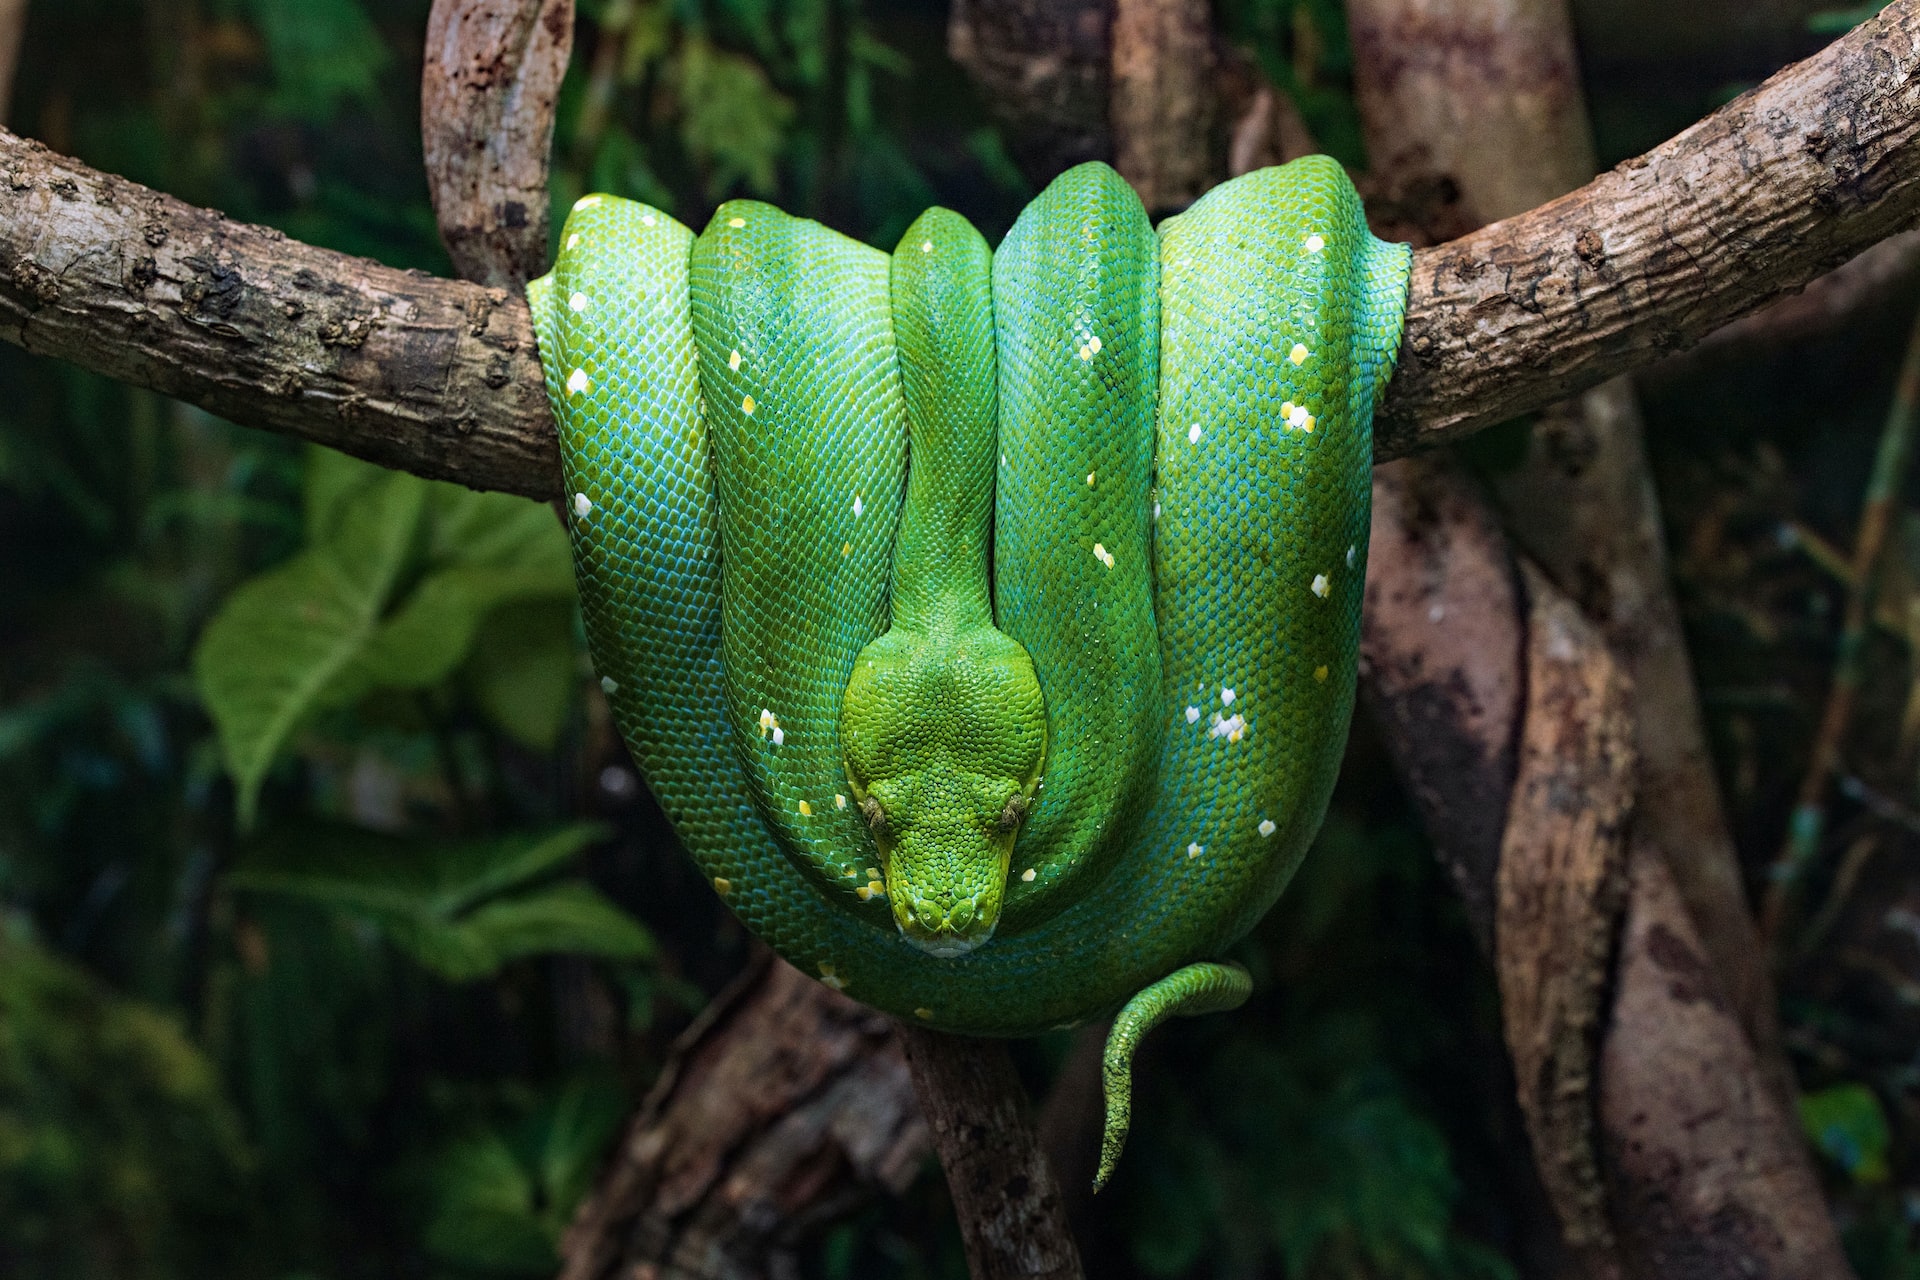 A green snake curled up on a tree branch